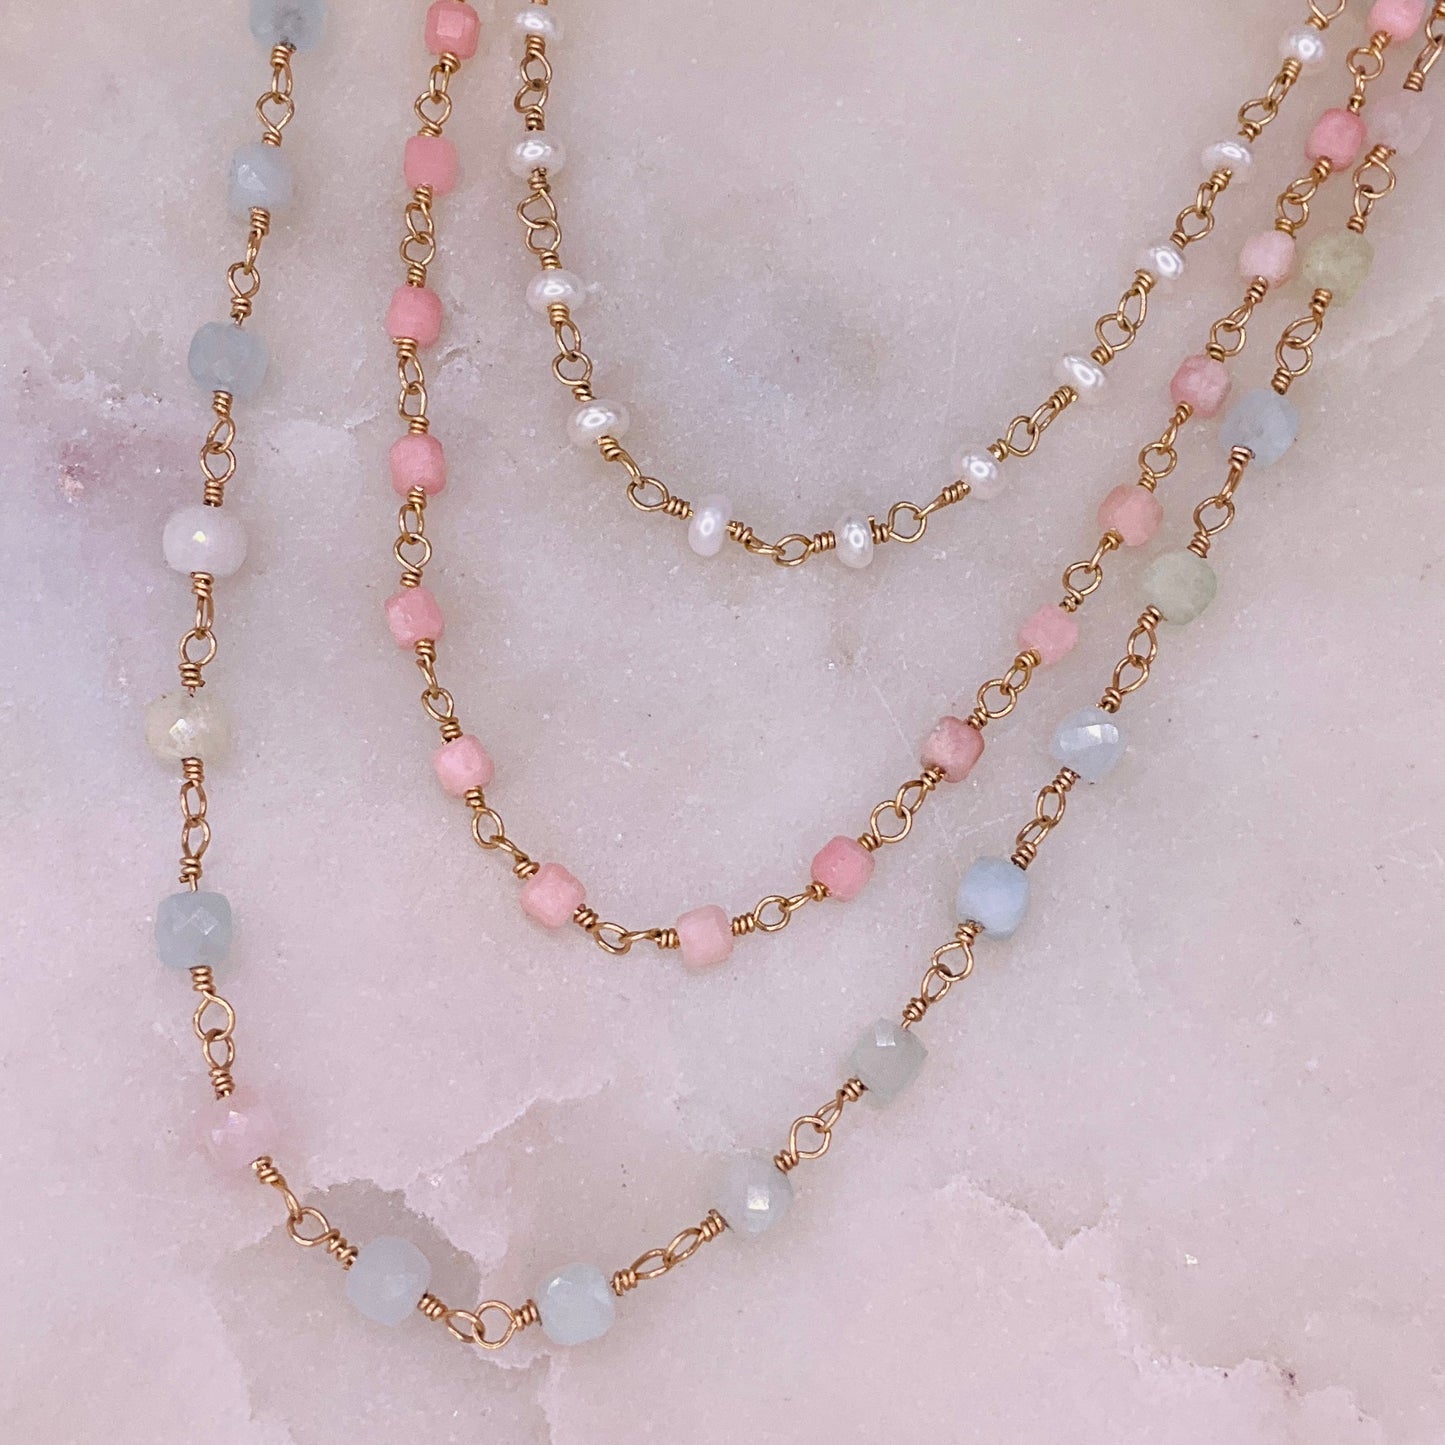 Gemstone Rosary Necklace ~ Pink Peruvian Opal Cubes